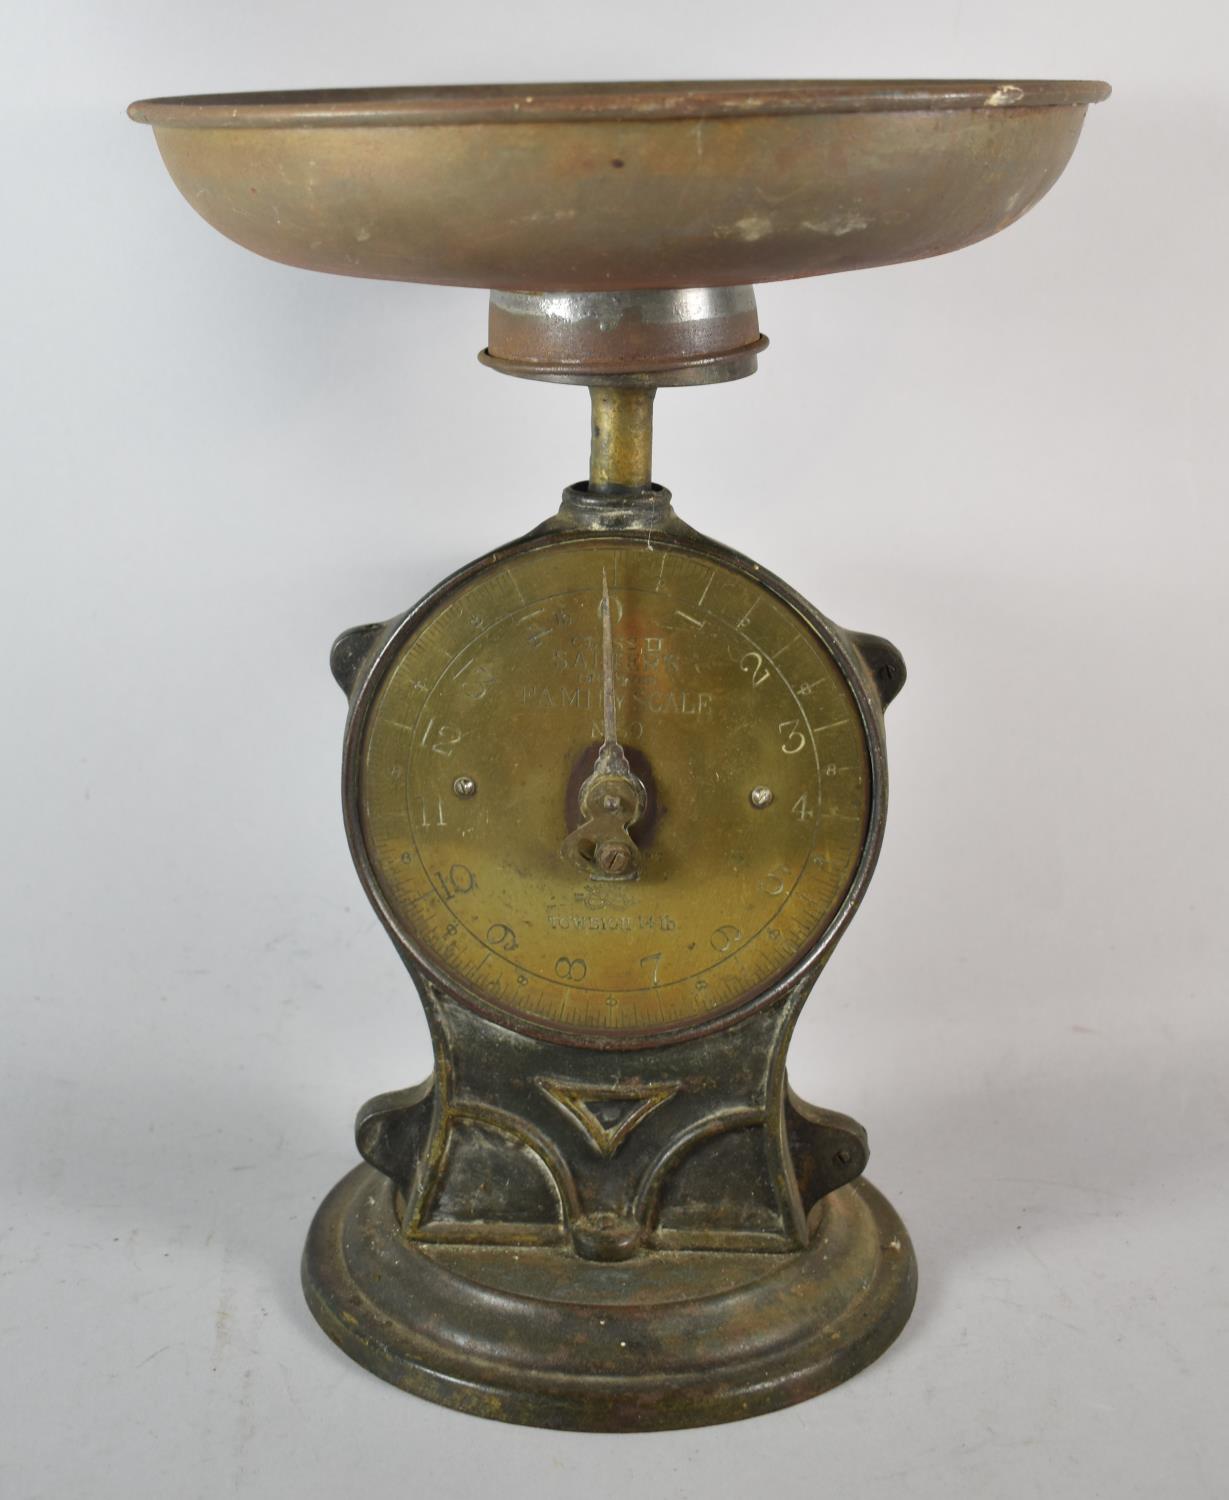 A Late 19th Century Salter's Improved Family Scale No.50, Circular Pan, 32.5cm high